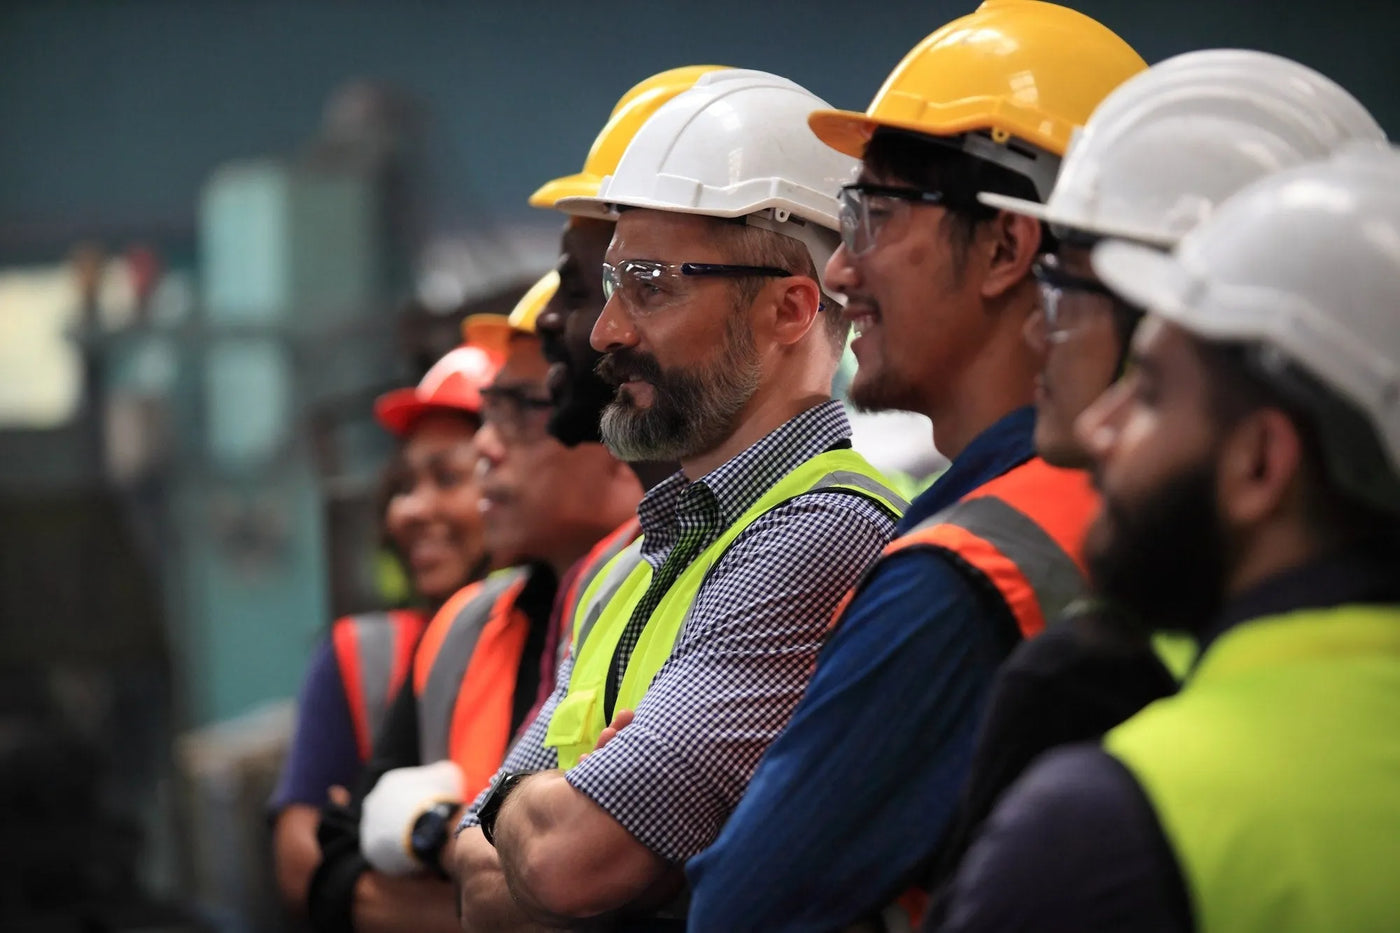 Does Your Manager Care About Your Safety? The Importance of Leadership in Workplace Safety